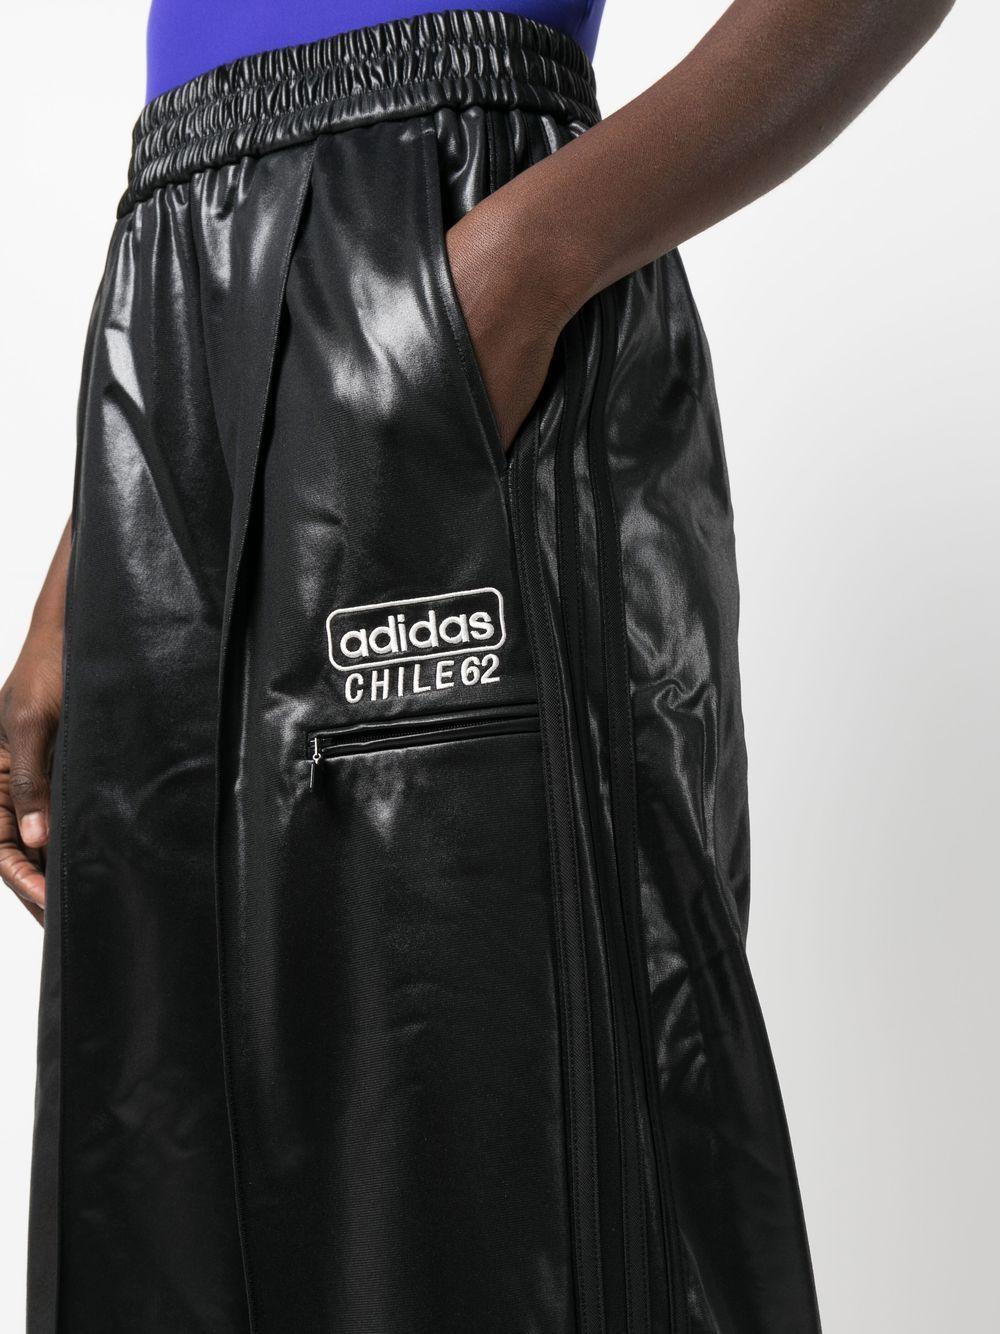 adidas Blue Version Chile 62 Track Pants in Black | Lyst